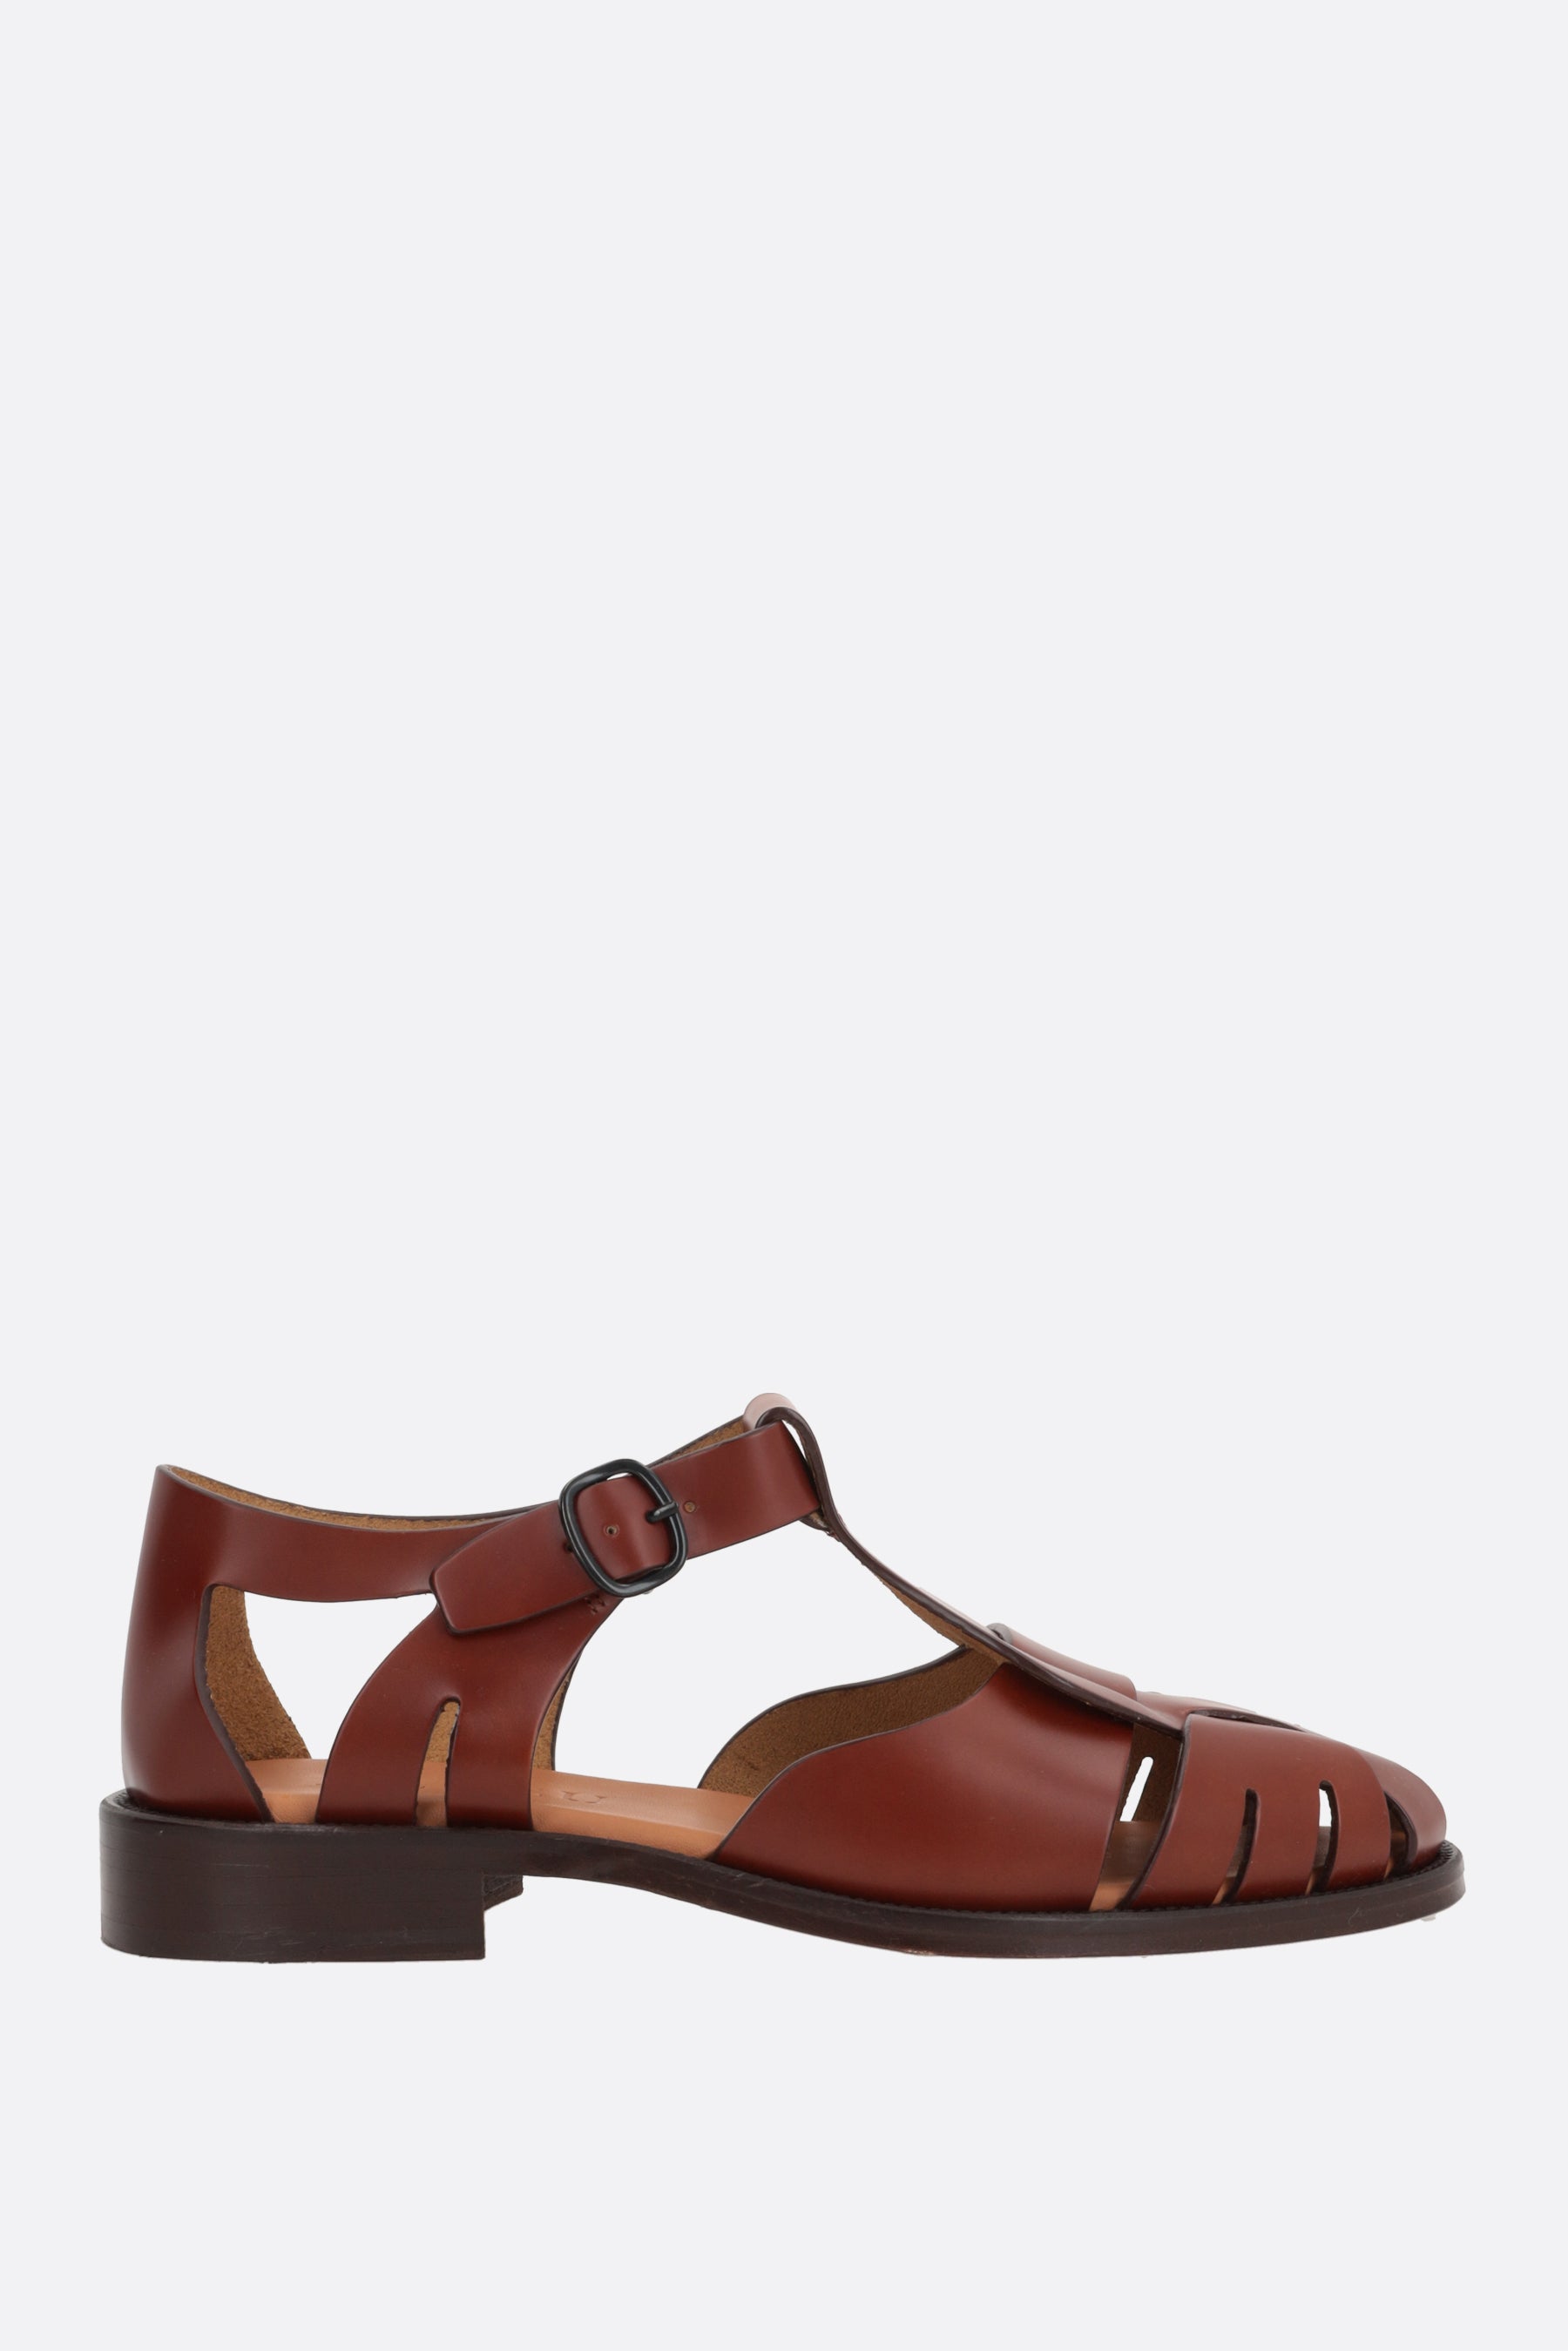 Pesca brushed leather flat sandals